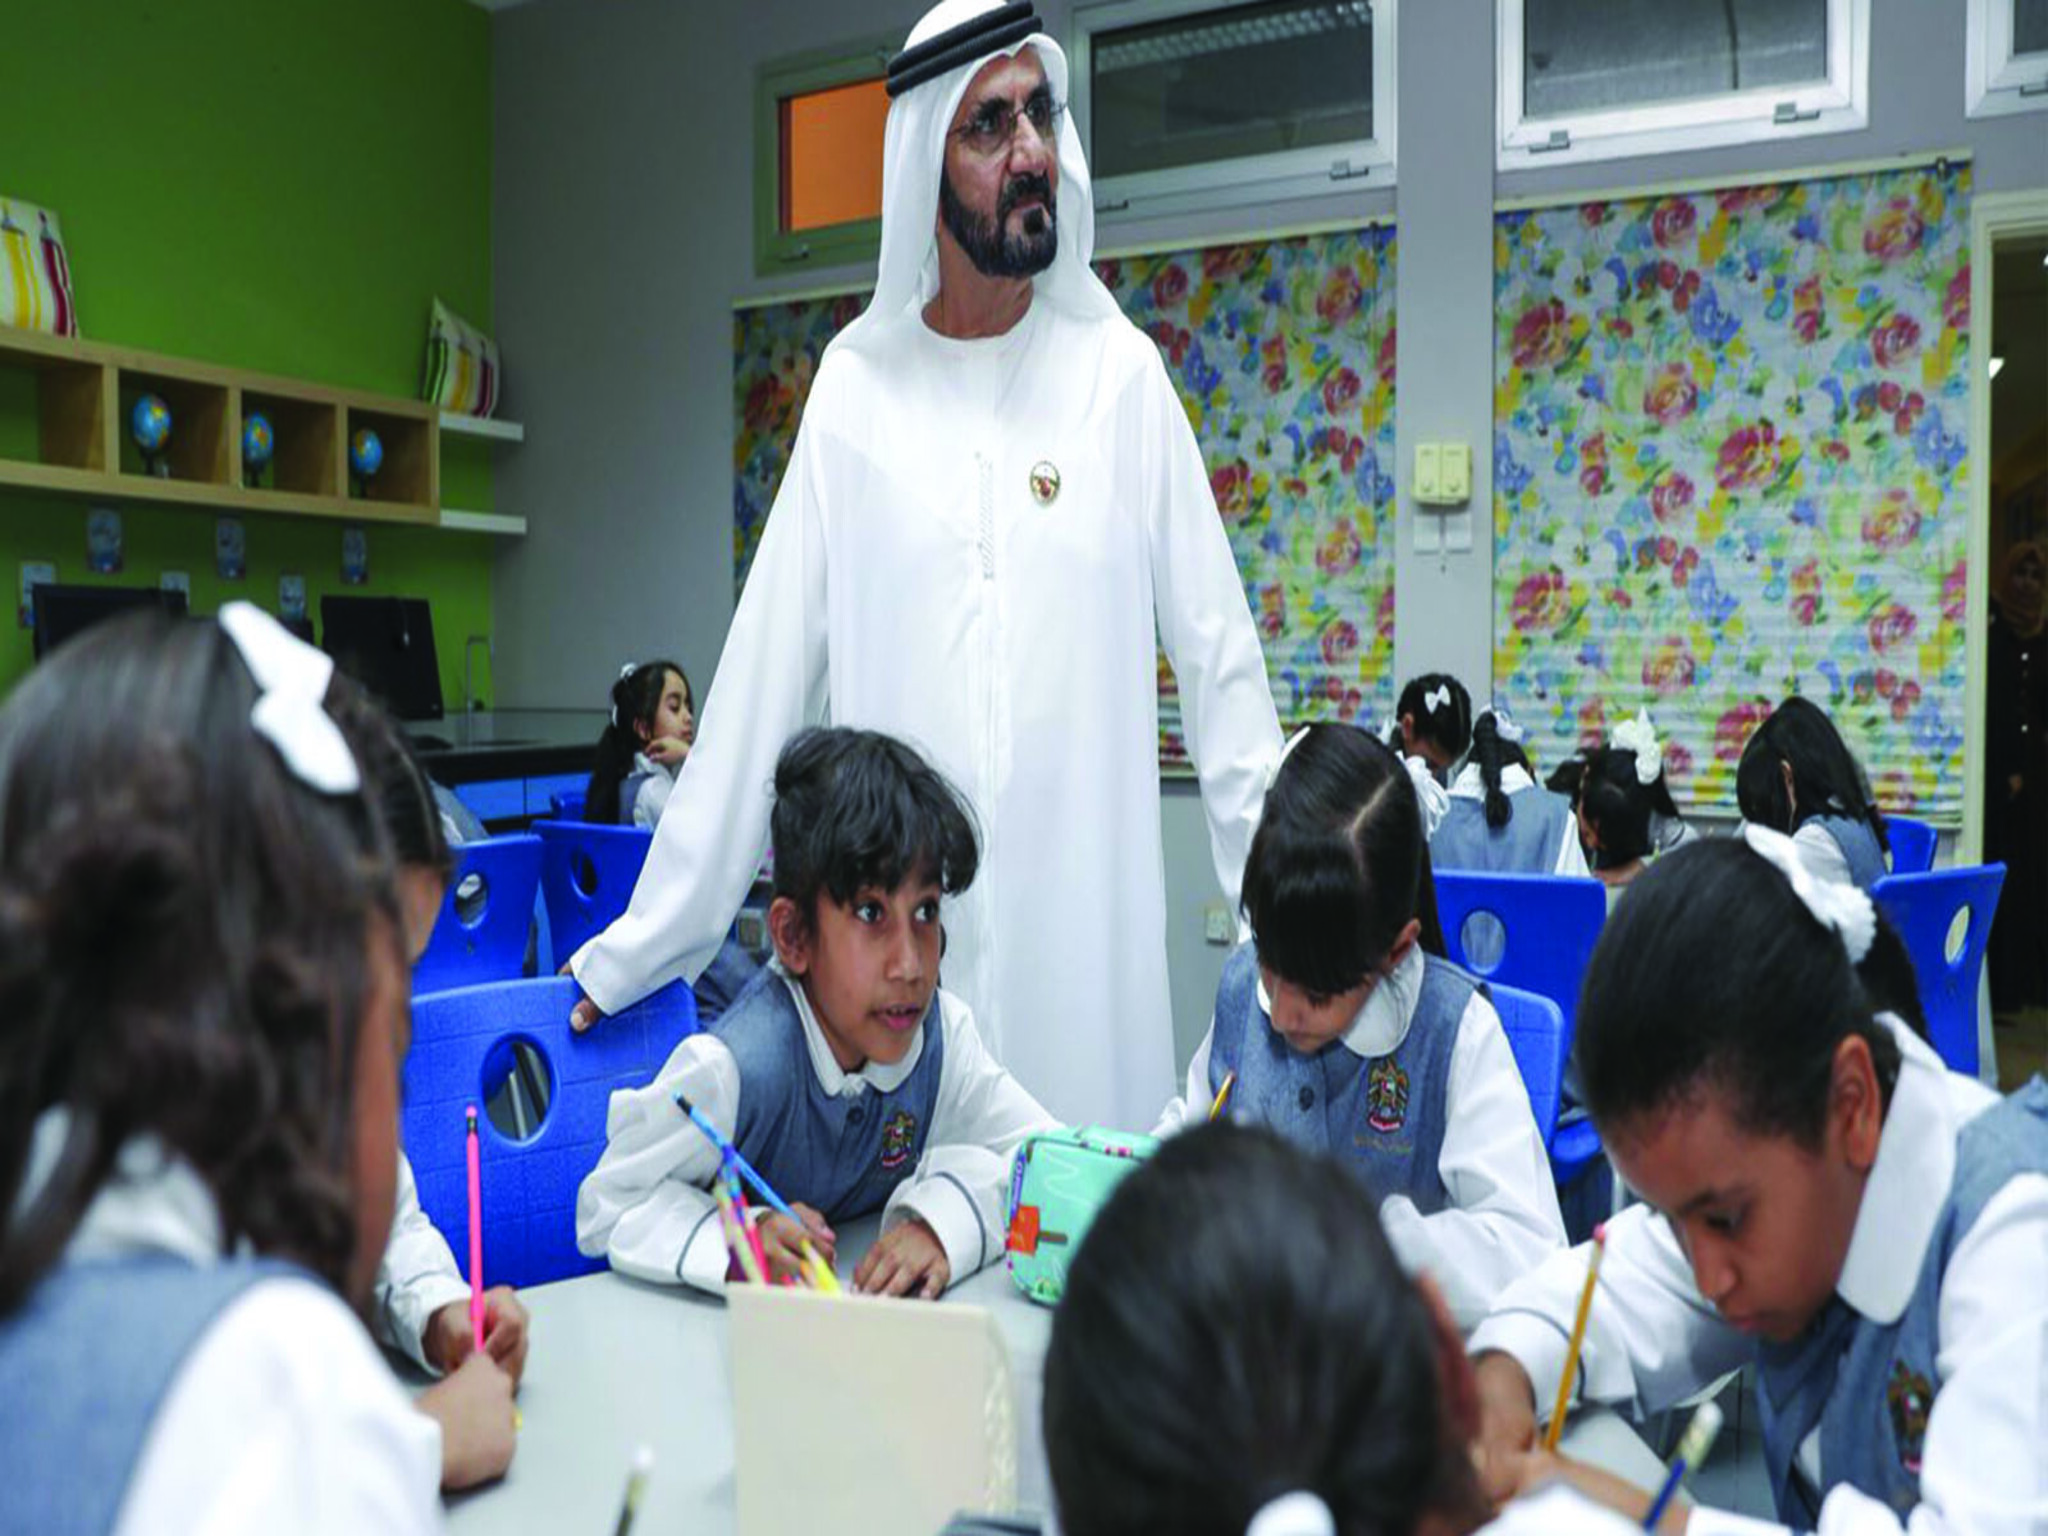 The UAE announces the dates of the Eid al-Fitr holiday for students and schools